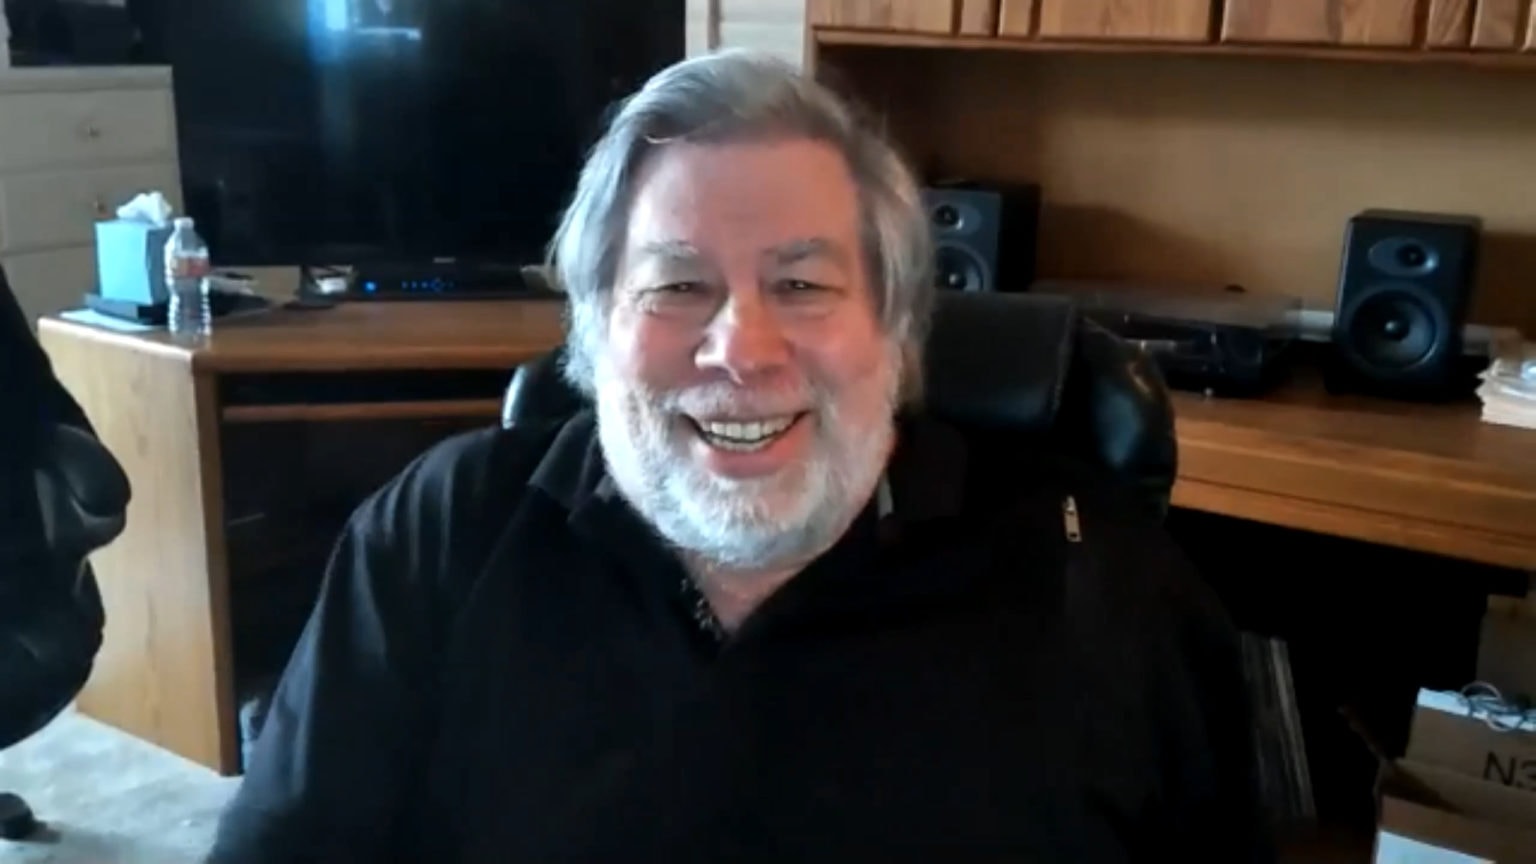 Guess who showed up as a surprise attendee at the online Newton conference: Steve Wozniak!